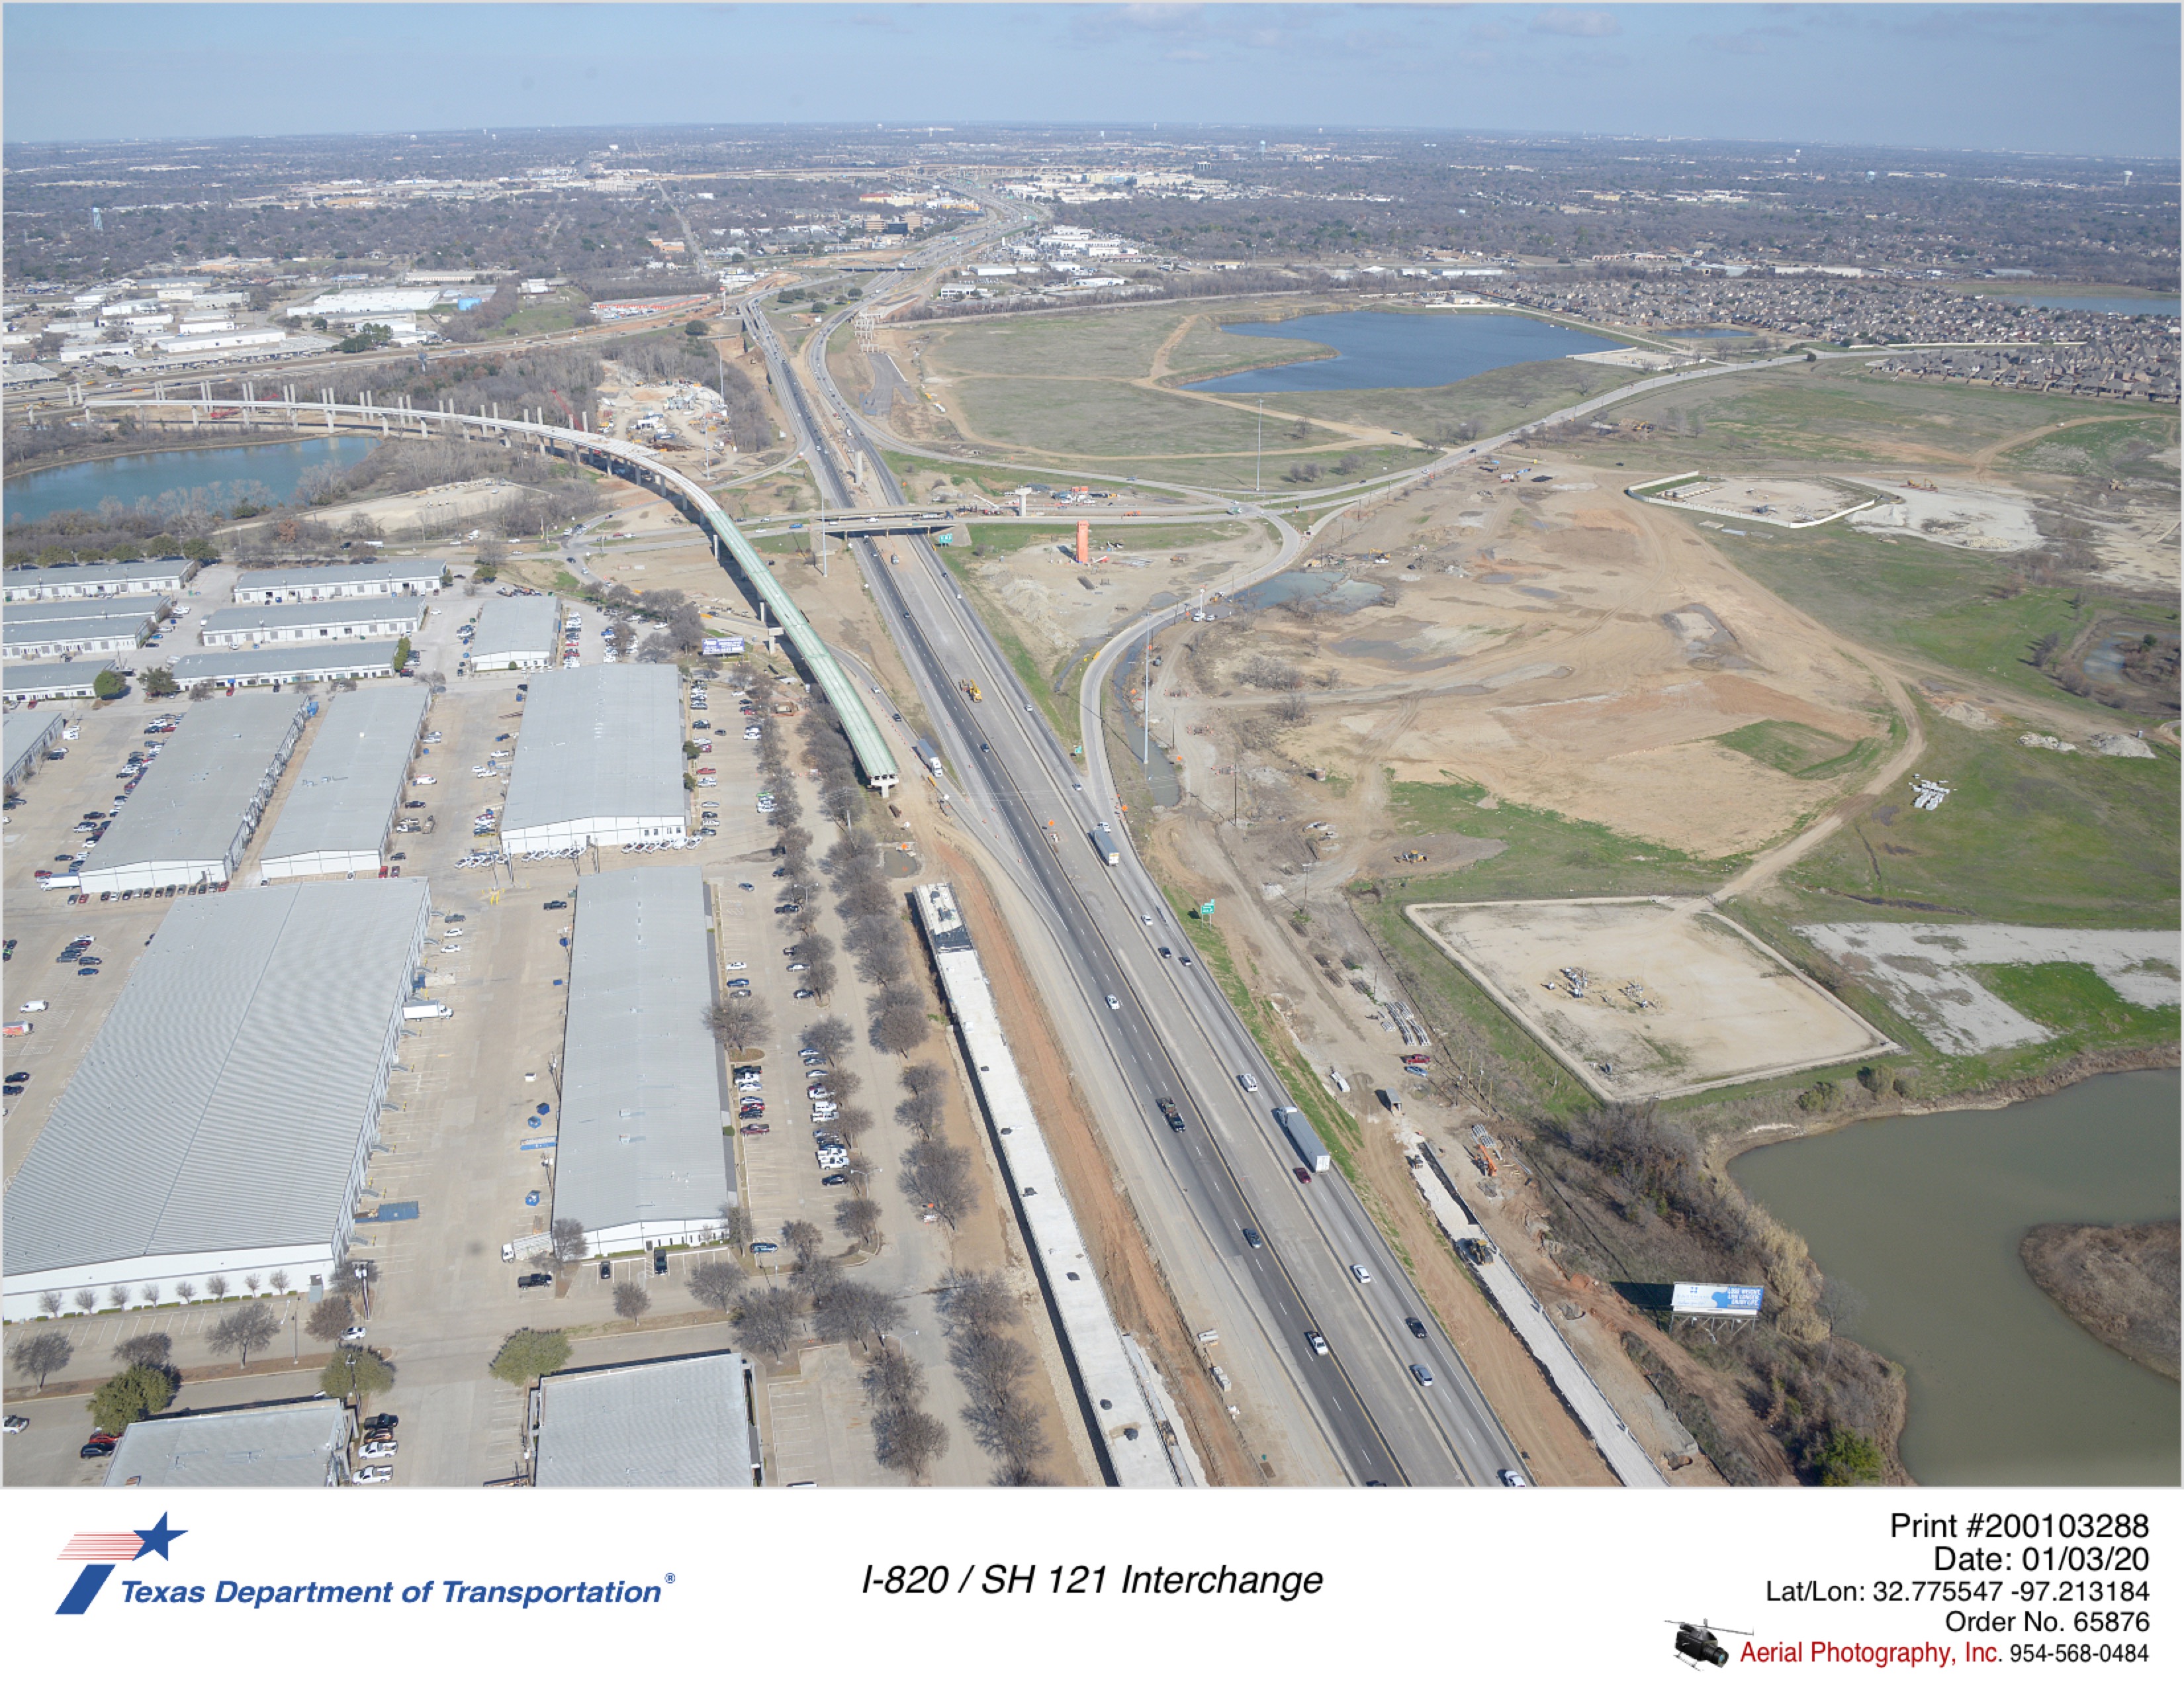 I-820 looking northeast over the Trinity River with Trinity Blvd interchange in the mid-ground. Construction shown for southbound direct connector SH 121 and mainlanes, and work along northoubnd I-820.